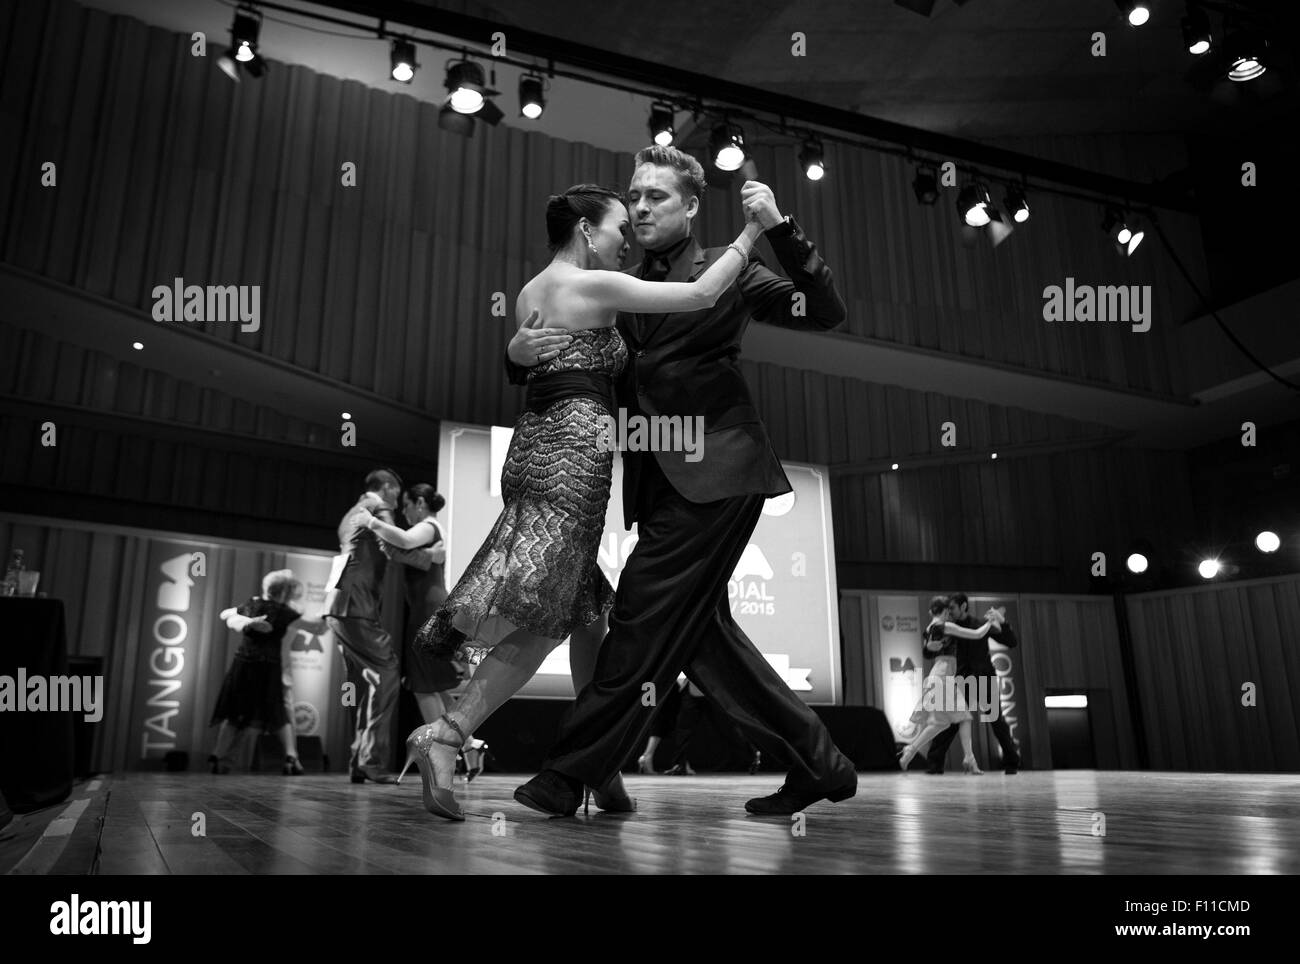 (150825) -- BUENOS AIRES, Aug. 25, 2015 (Xinhua) -- Chinese dancer Ping Yu and her Ukrainian partner Sergiy Podbolotnyy dance during semifinals of the Tango World Cup in Buenos Aires city, capital of Argentina, on Aug. 24, 2015. Tango is sweeping across Argentina's borders, taking Asia, especially China, by storm. This year's key competitive event, the 2015 Tango Festival and World Cup, which is being held Aug. 14 to 27 in Argentina's capital Buenos Aires, features couples from around the globe, including a Ukrainian/Chinese couple. Ukrainian-born dancer Sergiy Podbolotnyy and his Chinese part Stock Photo